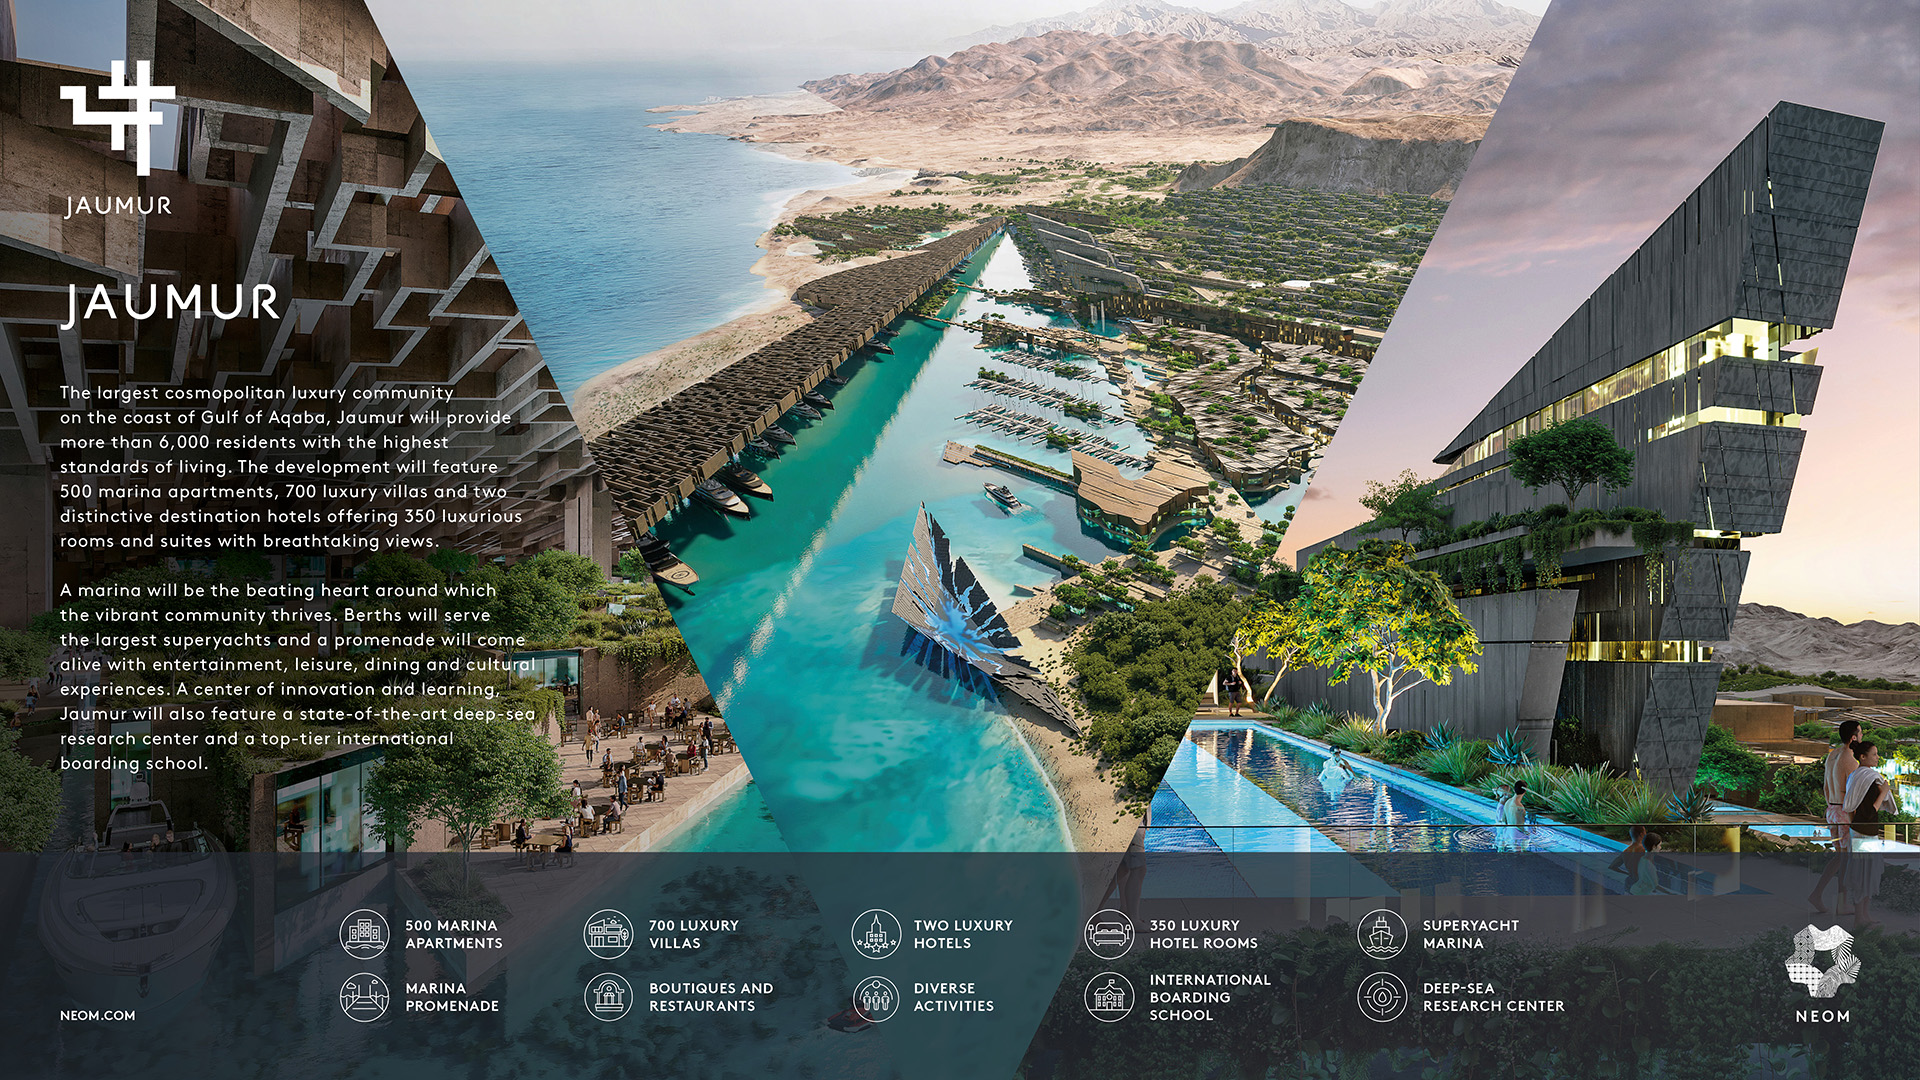 Infographic for Jaumur, a luxury waterfront community with marinas, hotels, residential apartments, and an advanced research center on the Gulf of Aqaba